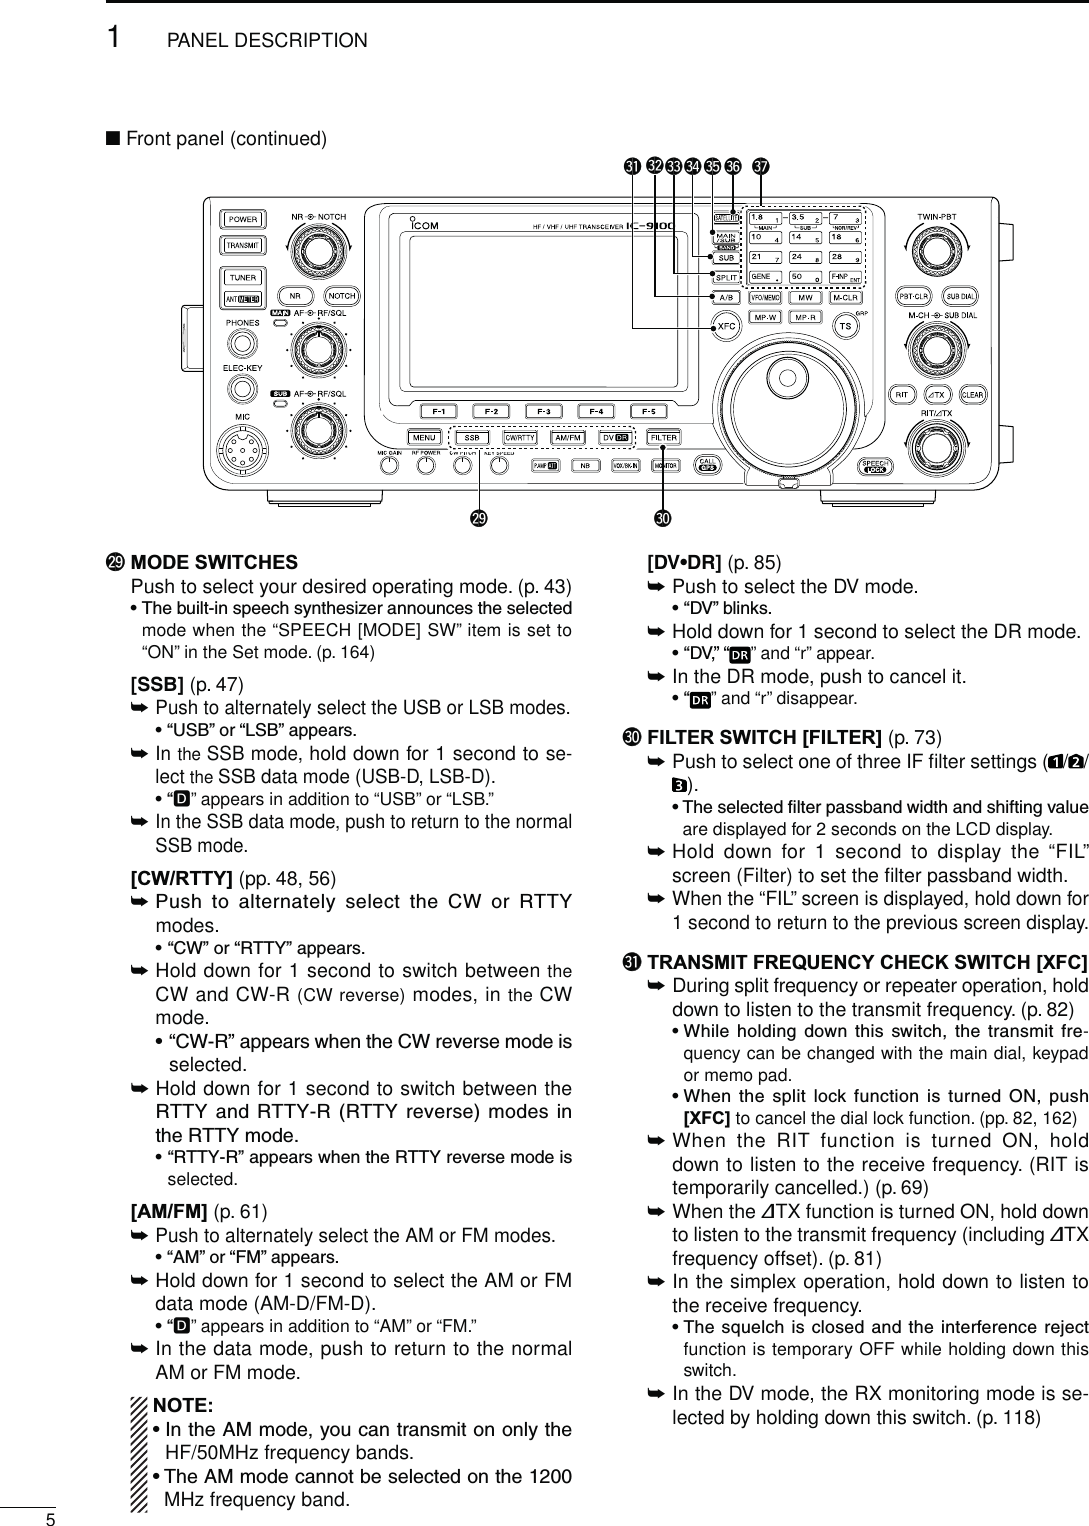 @9 MODE SWITCHESPush to select your desired operating mode. (p. 43)s4HEBUILTINSPEECHSYNTHESIZERANNOUNCESTHESELECTEDmode when the “SPEECH [MODE] SW” item is set to “ON” in the Set mode. (p. 164) ;33&quot;= (p. 47)±Push to alternately select the USB or LSB modes.  sh53&quot;vORh,3&quot;vAPPEARS±In the SSB mode, hold down for 1 second to se-lect the SSB data mode (USB-D, LSB-D).shD” appears in addition to “USB” or “LSB.”±In the SSB data mode, push to return to the normal SSB mode.[CW/RTTY] (pp. 48, 56)±0USH TO ALTERNATELY SELECT THE #7 OR 2449modes.  sh#7vORh2449vAPPEARS±  Hold down for 1 second to switch between the CW and CW-R (CW reverse) modes, in the CW mode.sh#72vAPPEARSWHENTHE#7REVERSEMODEISselected.±  Hold down for 1 second to switch between the 2449AND244922449REVERSEMODESINTHE2449MODEsh24492vAPPEARSWHENTHE2449REVERSEMODEISselected.[AM/FM] (p. 61)±Push to alternately select the AM or FM modes.  sh!-vORh&amp;-vAPPEARS±  Hold down for 1 second to select the AM or FM data mode (AM-D/FM-D).shD” appears in addition to “AM” or “FM.”±  In the data mode, push to return to the normal AM or FM mode.NOTE:s)NTHE!-MODEYOUCANTRANSMITONONLYTHEHF/50MHz frequency bands.s4HE!-MODECANNOTBESELECTEDONTHEMHz frequency band. ;$6s$2= (p. 85)±Push to select the DV mode.  sh$6vBLINKS±Hold down for 1 second to select the DR mode.sh$6vh” and “r” appear.±In the DR mode, push to cancel it.sh” and “r” disappear.#0 FILTER SWITCH [FILTER] (p. 73)±  Push to select one of three IF ﬁlter settings ( / /).s4HESELECTEDlLTERPASSBANDWIDTHANDSHIFTINGVALUEare displayed for 2 seconds on the LCD display.±  Hold down for 1 second to display the “FIL” screen (Filter) to set the ﬁlter passband width.±When the “FIL” screen is displayed, hold down for 1 second to return to the previous screen display.#1TRANSMIT FREQUENCY CHECK SWITCH [XFC]±  During split frequency or repeater operation, hold down to listen to the transmit frequency. (p. 82)s7HILE HOLDINGDOWNTHIS SWITCHTHE TRANSMITFRE-quency can be changed with the main dial, keypad or memo pad.s7HEN THE SPLIT LOCK FUNCTION IS TURNED /. PUSH[XFC] to cancel the dial lock function. (pp. 82, 162)±  When the RIT function is turned ON, hold down to listen to the receive frequency. (RIT is temporarily cancelled.) (p. 69)±  When the ∂TX function is turned ON, hold down to listen to the transmit frequency (including ∂TX frequency offset). (p. 81)±  In the simplex operation, hold down to listen to the receive frequency.s4HESQUELCHISCLOSEDANDTHEINTERFERENCEREJECTfunction is temporary OFF while holding down this switch.±  In the DV mode, the RX monitoring mode is se-lected by holding down this switch. (p. 118)N Front panel (continued)51PANEL DESCRIPTION@9 #0#2#3#4#5 #6 #7#1